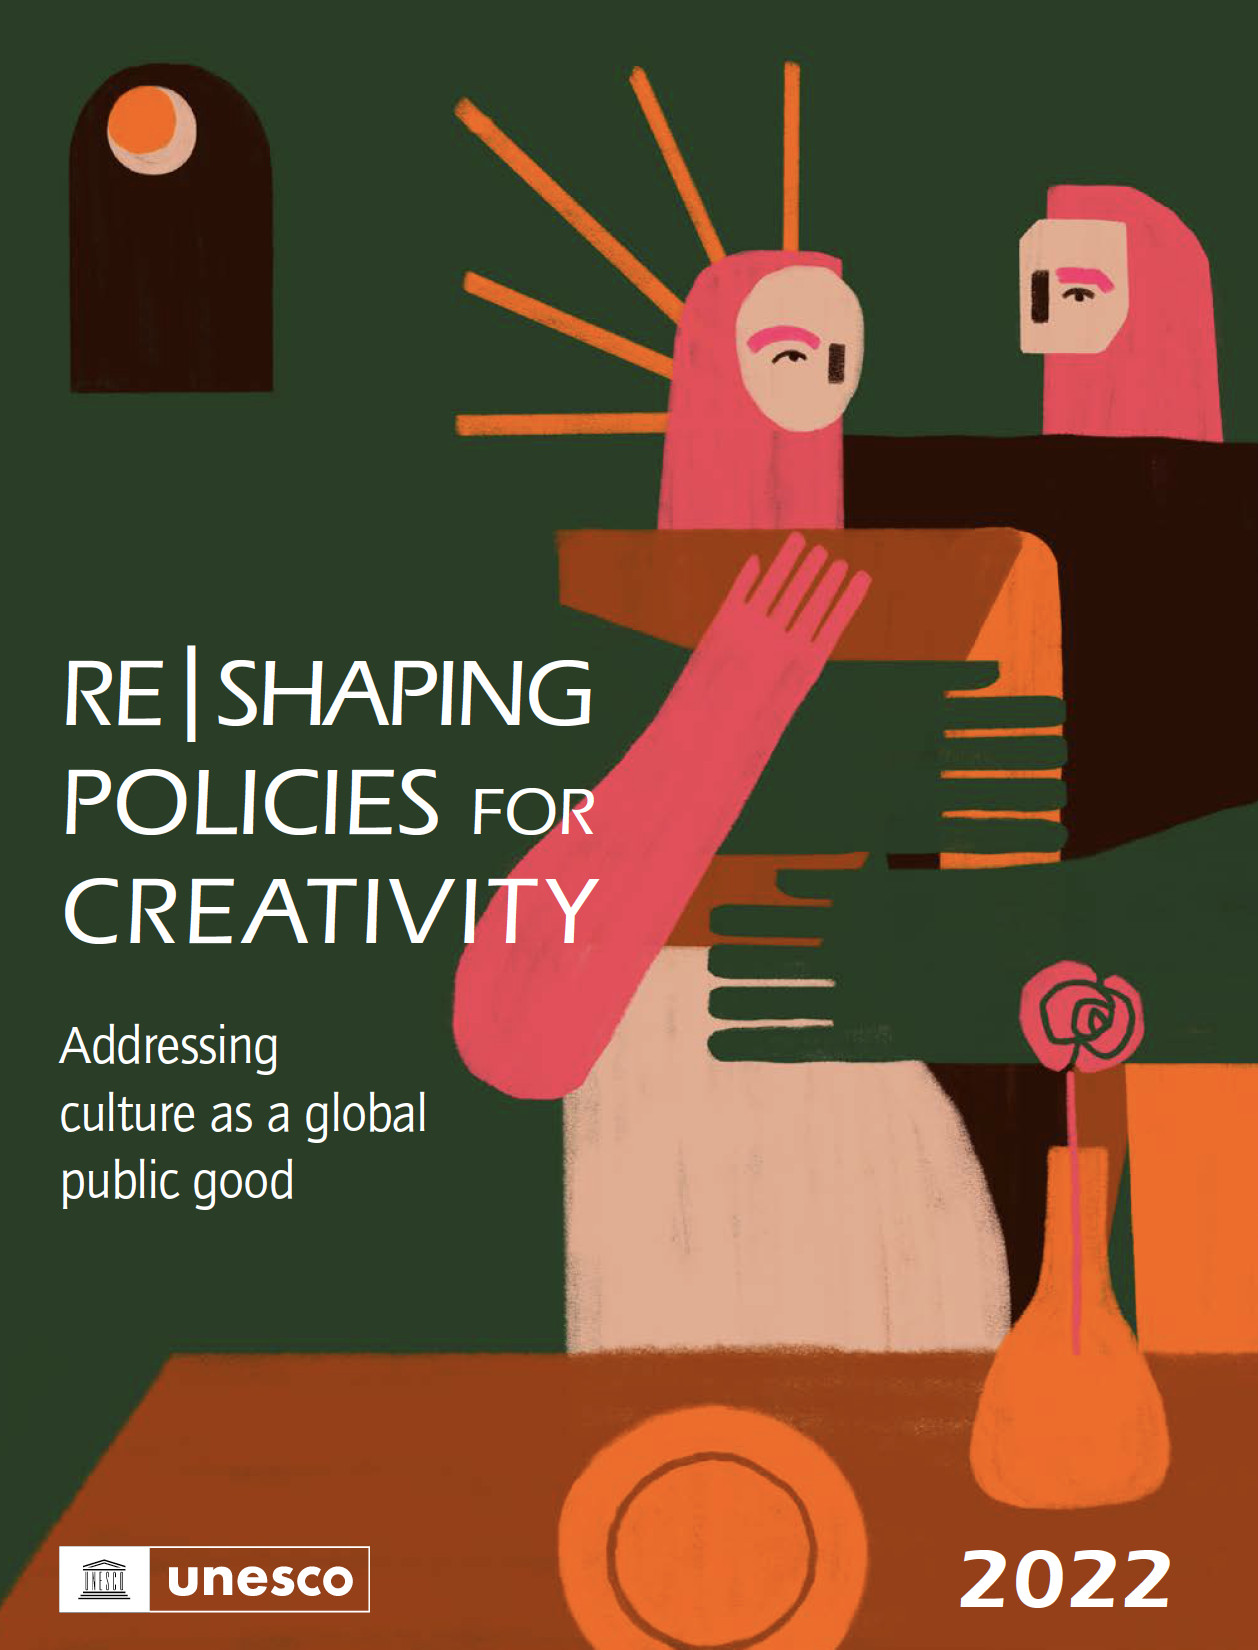 Re|Shaping Policies for Creativity – Addressing culture as a global public good offers (UNESCO, 2022)